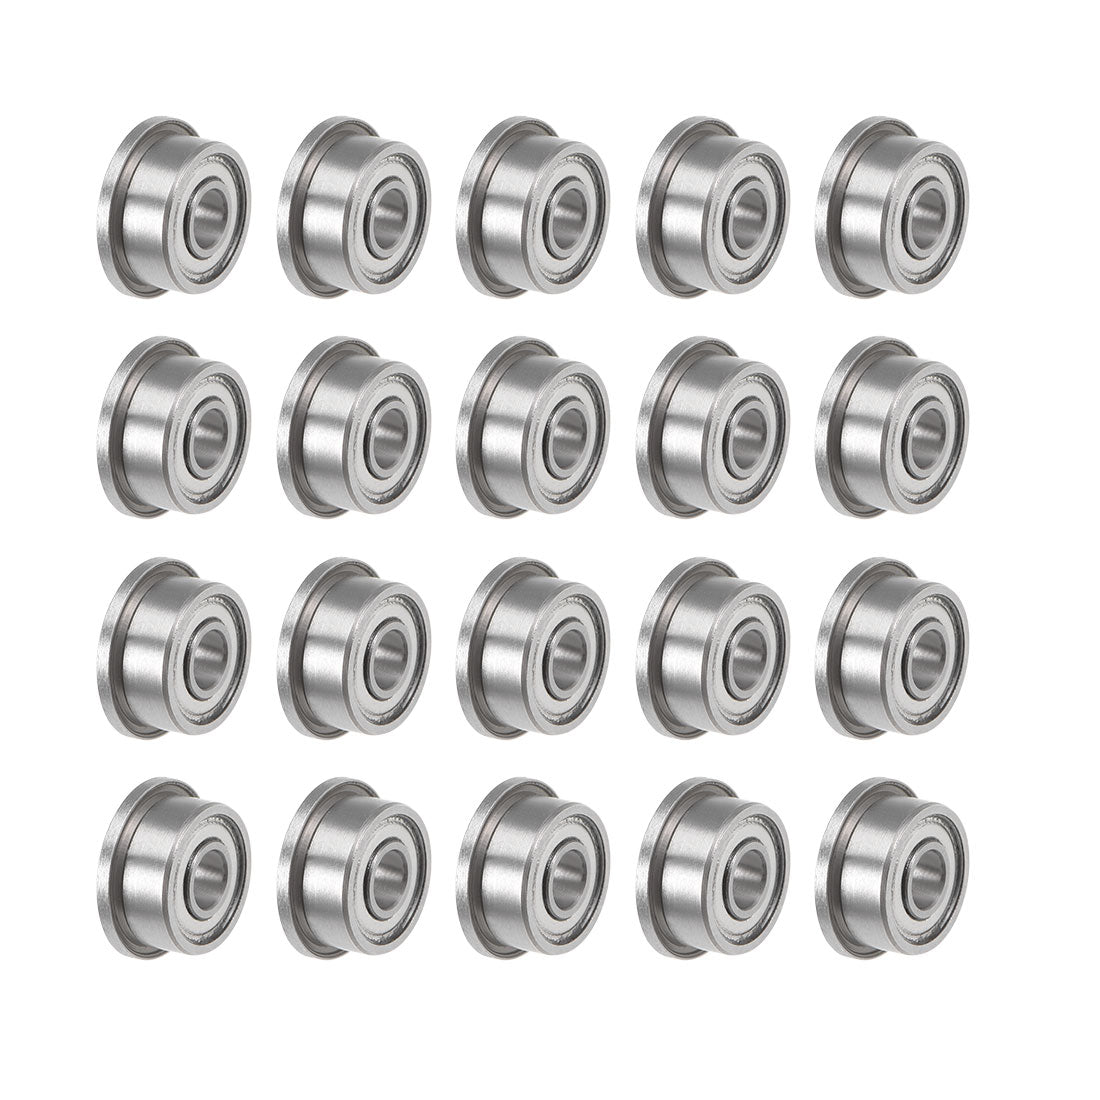 uxcell Uxcell F693ZZ Flange Ball Bearing 3mmx8mmx4mm Double Shielded Chrome Bearings 20 Pcs